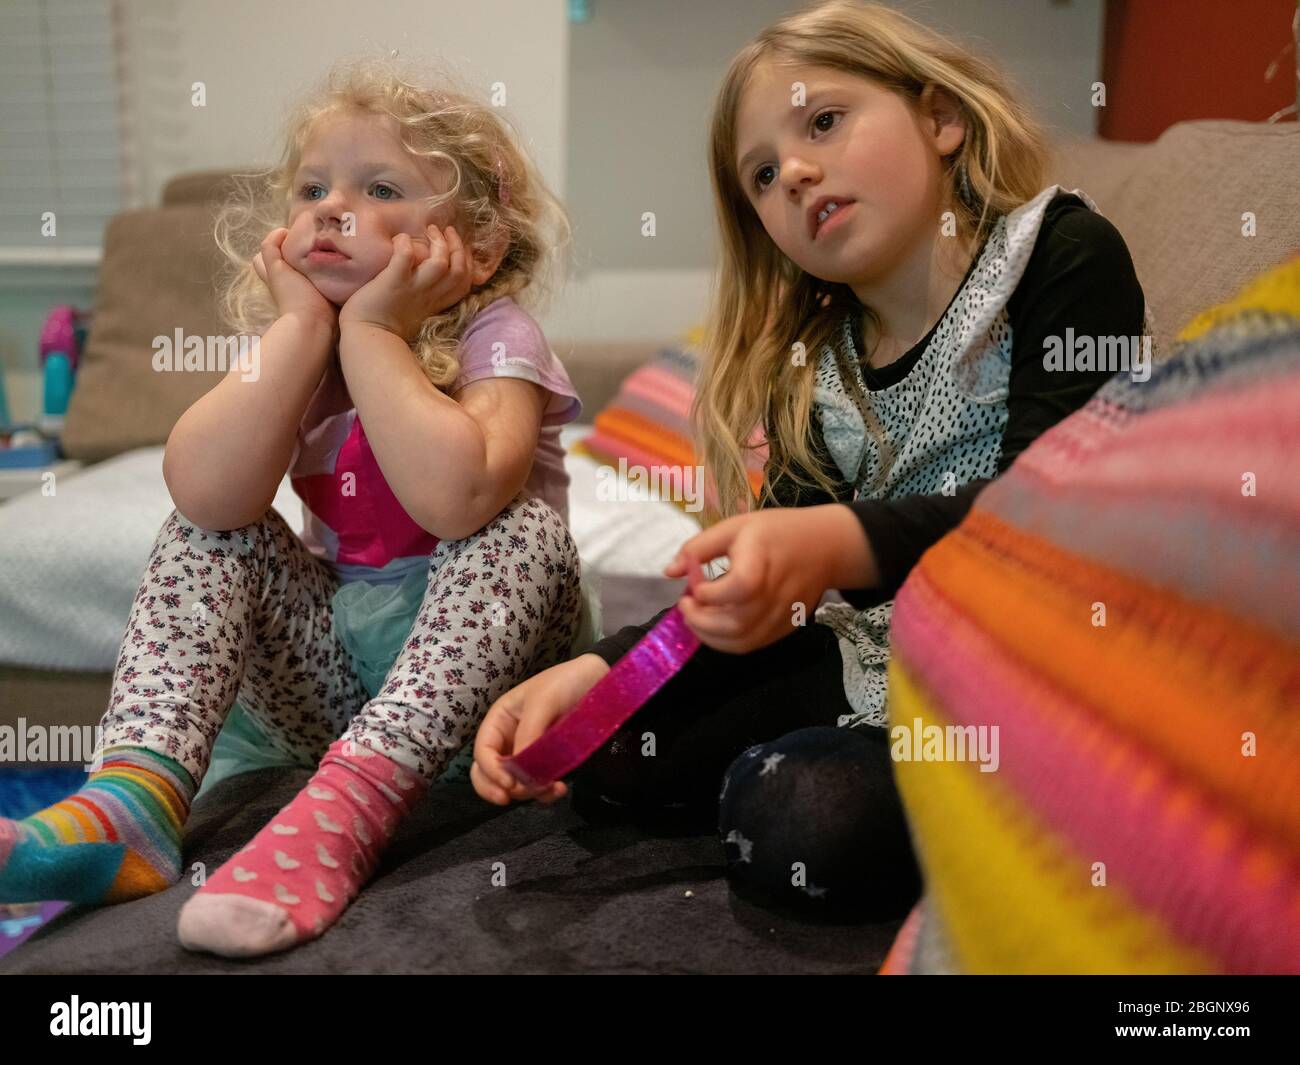 3rd April 2020 Two young sisters bored at home watching television. They are 4 and 2 years old. Taken during the coronavirus lockdown.  London, UK Stock Photo